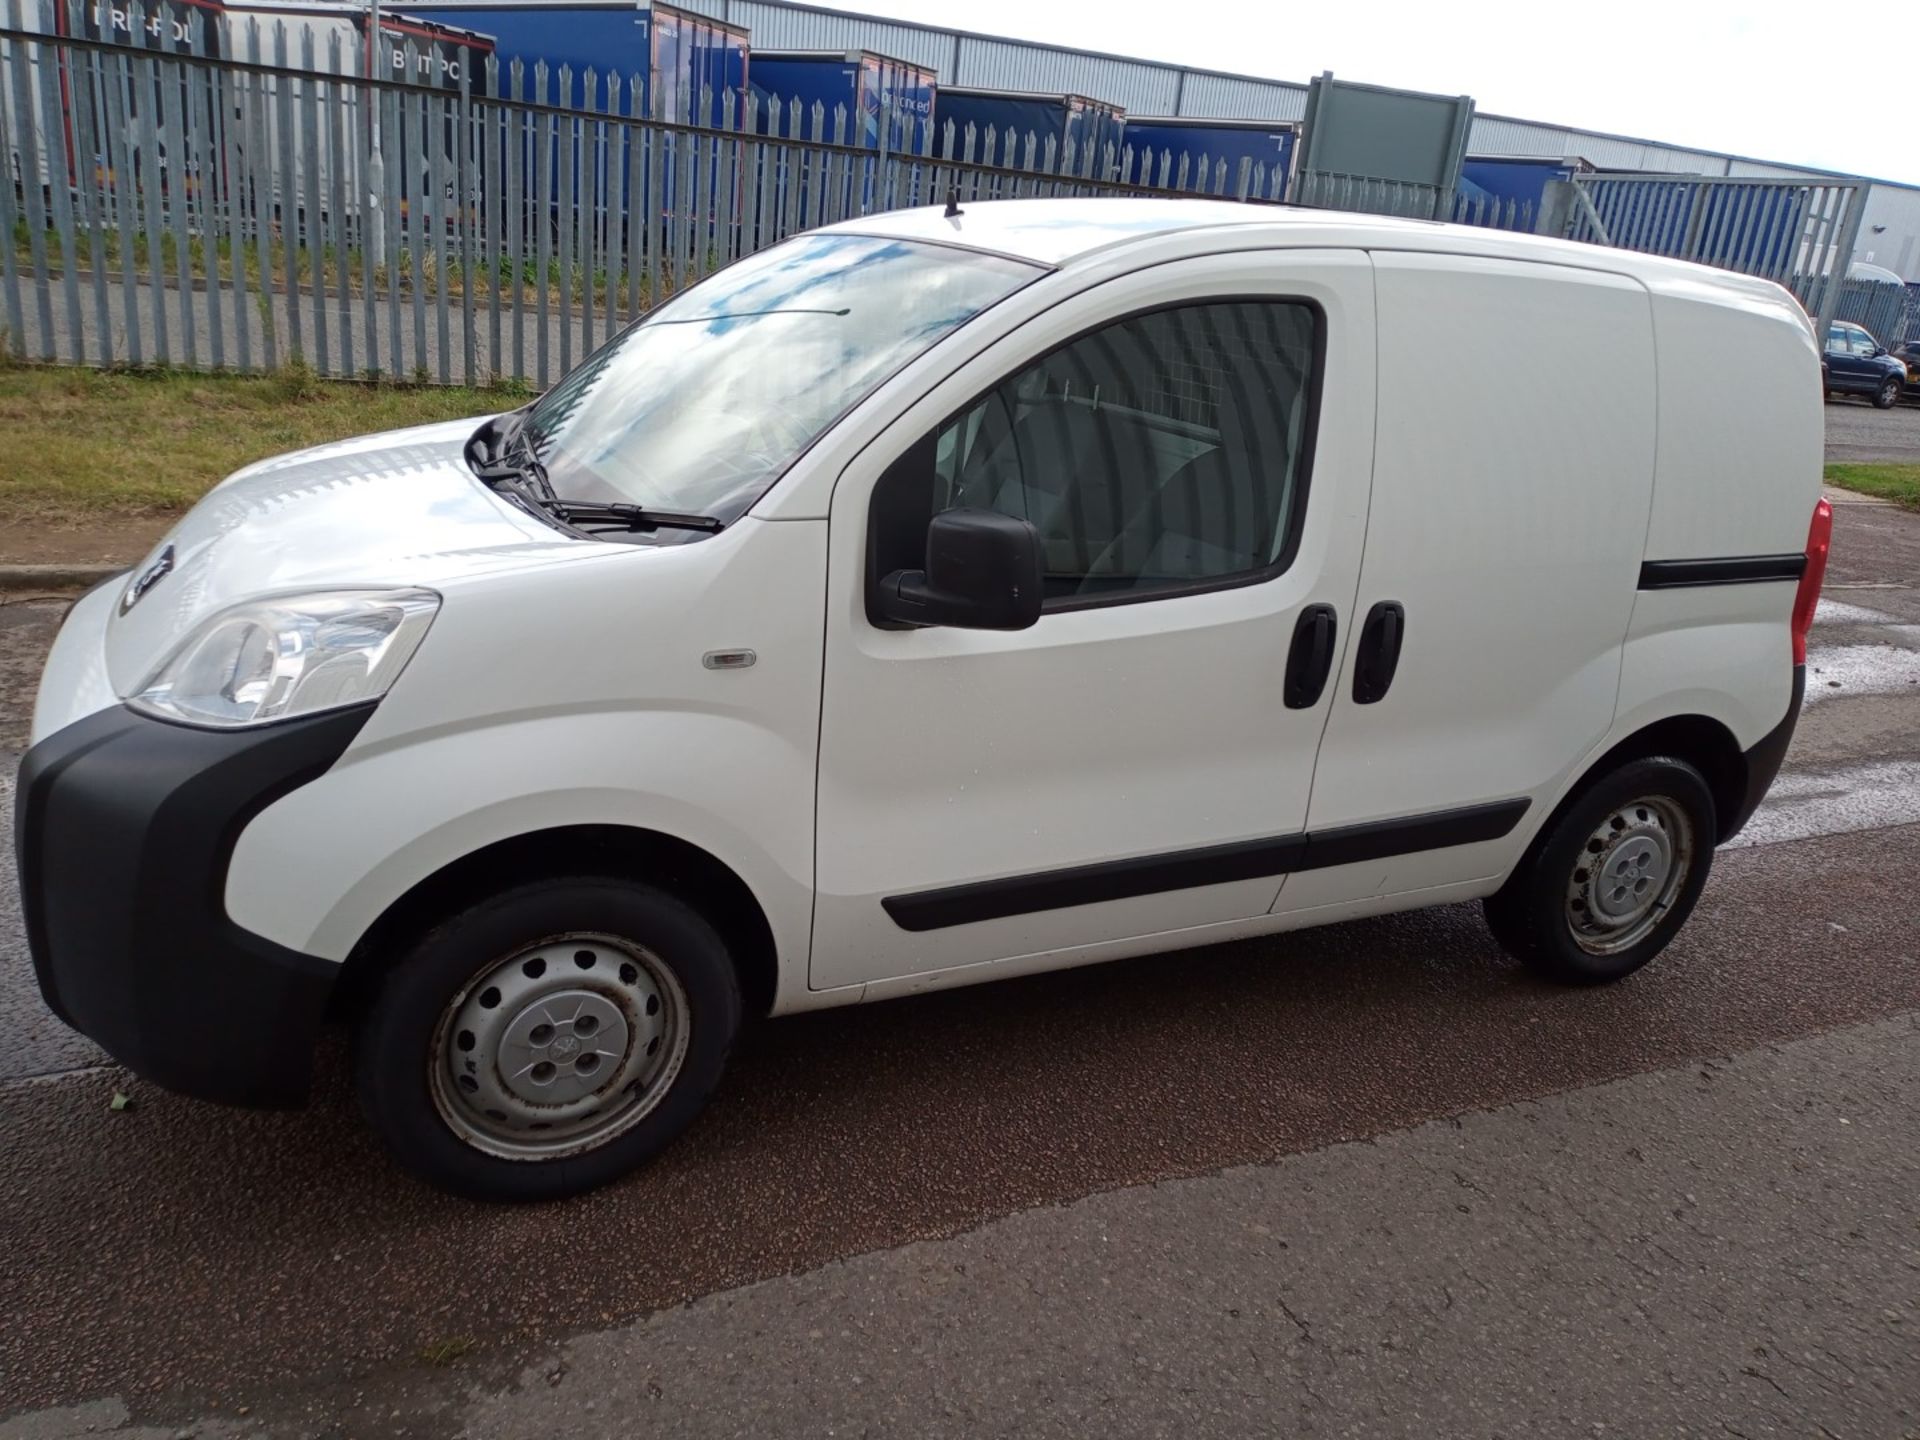 2015 Peugeot Bipper S Hdi White Panel - CL505 - Ref: VVS031 - Location: Corby, Northamptonshire - Image 5 of 25